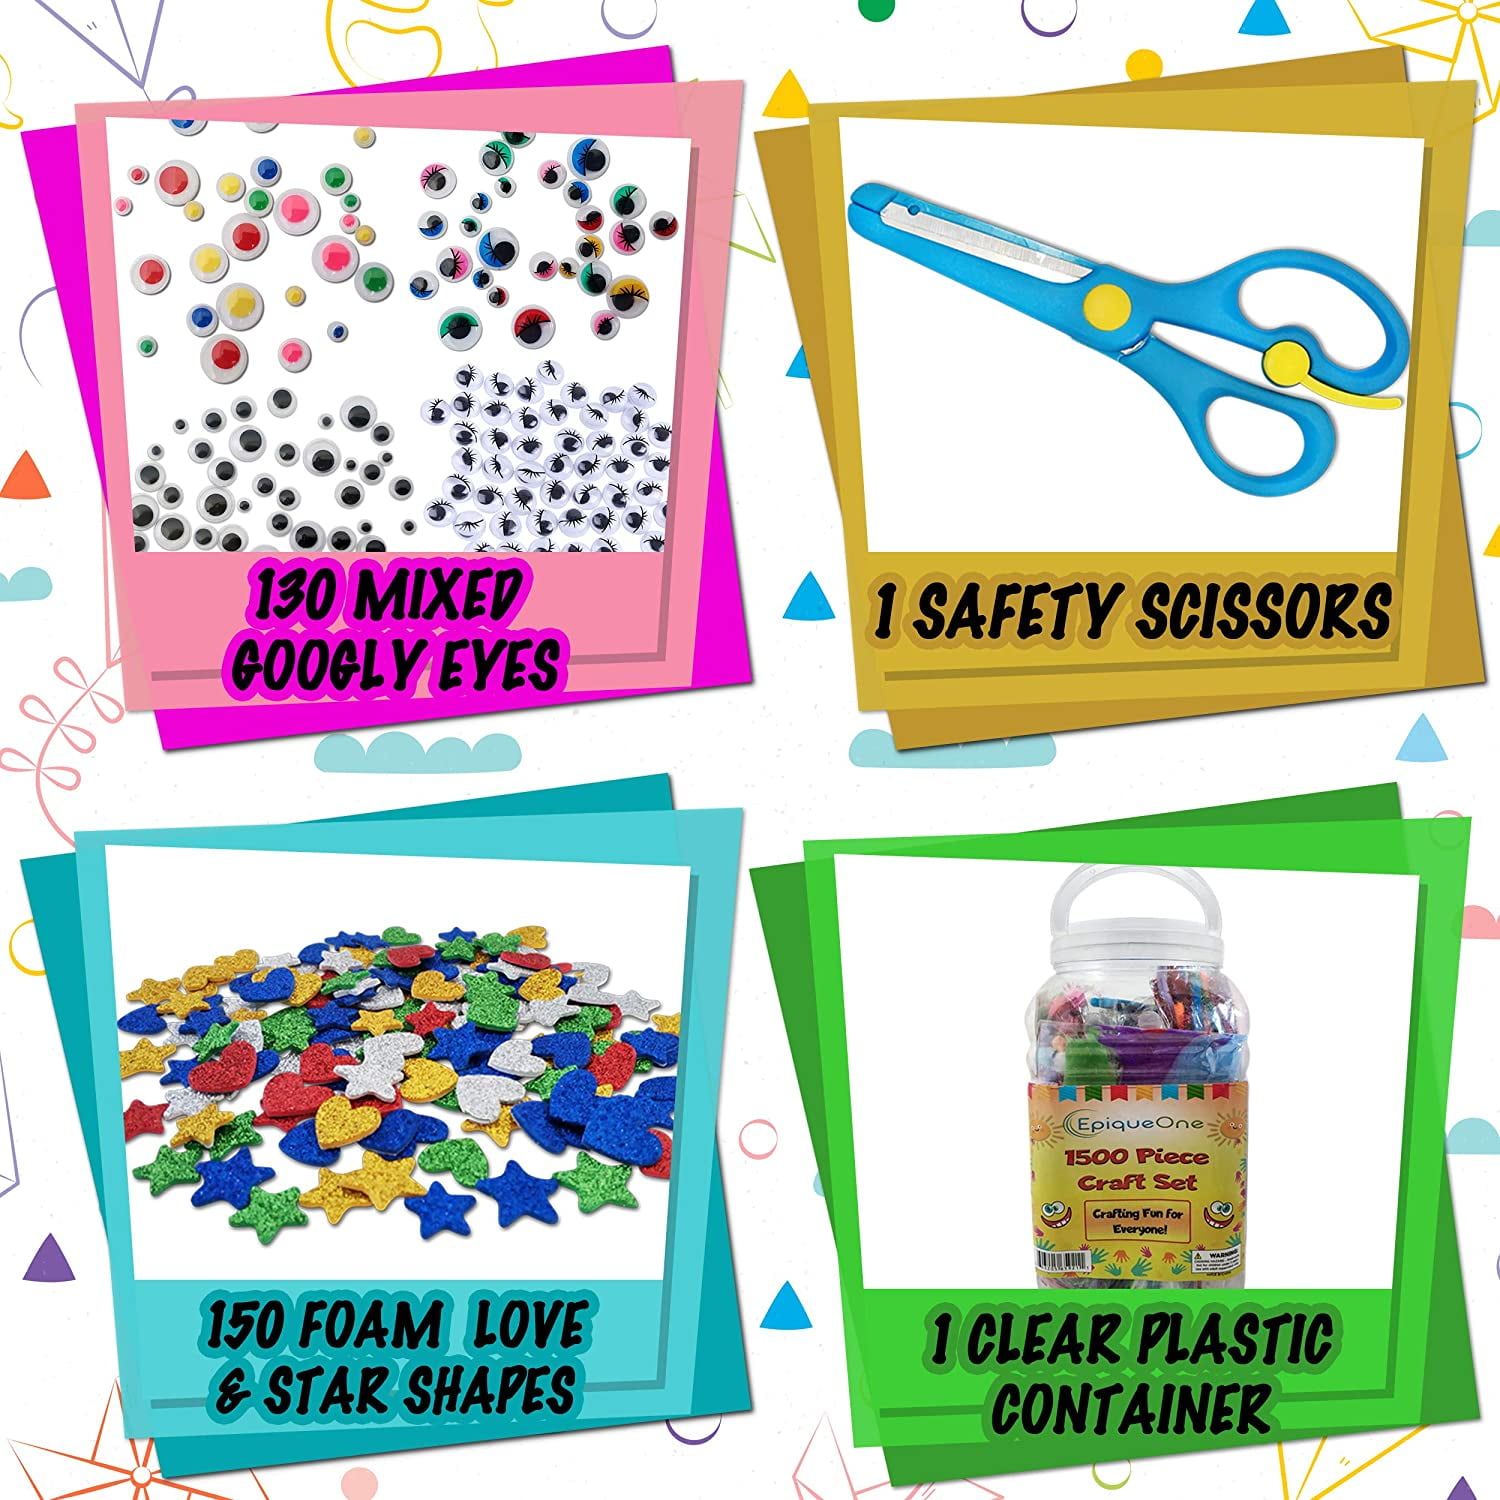 Googly Eyes - Chapter 2 - Books - Arts & Crafts - Party Decor